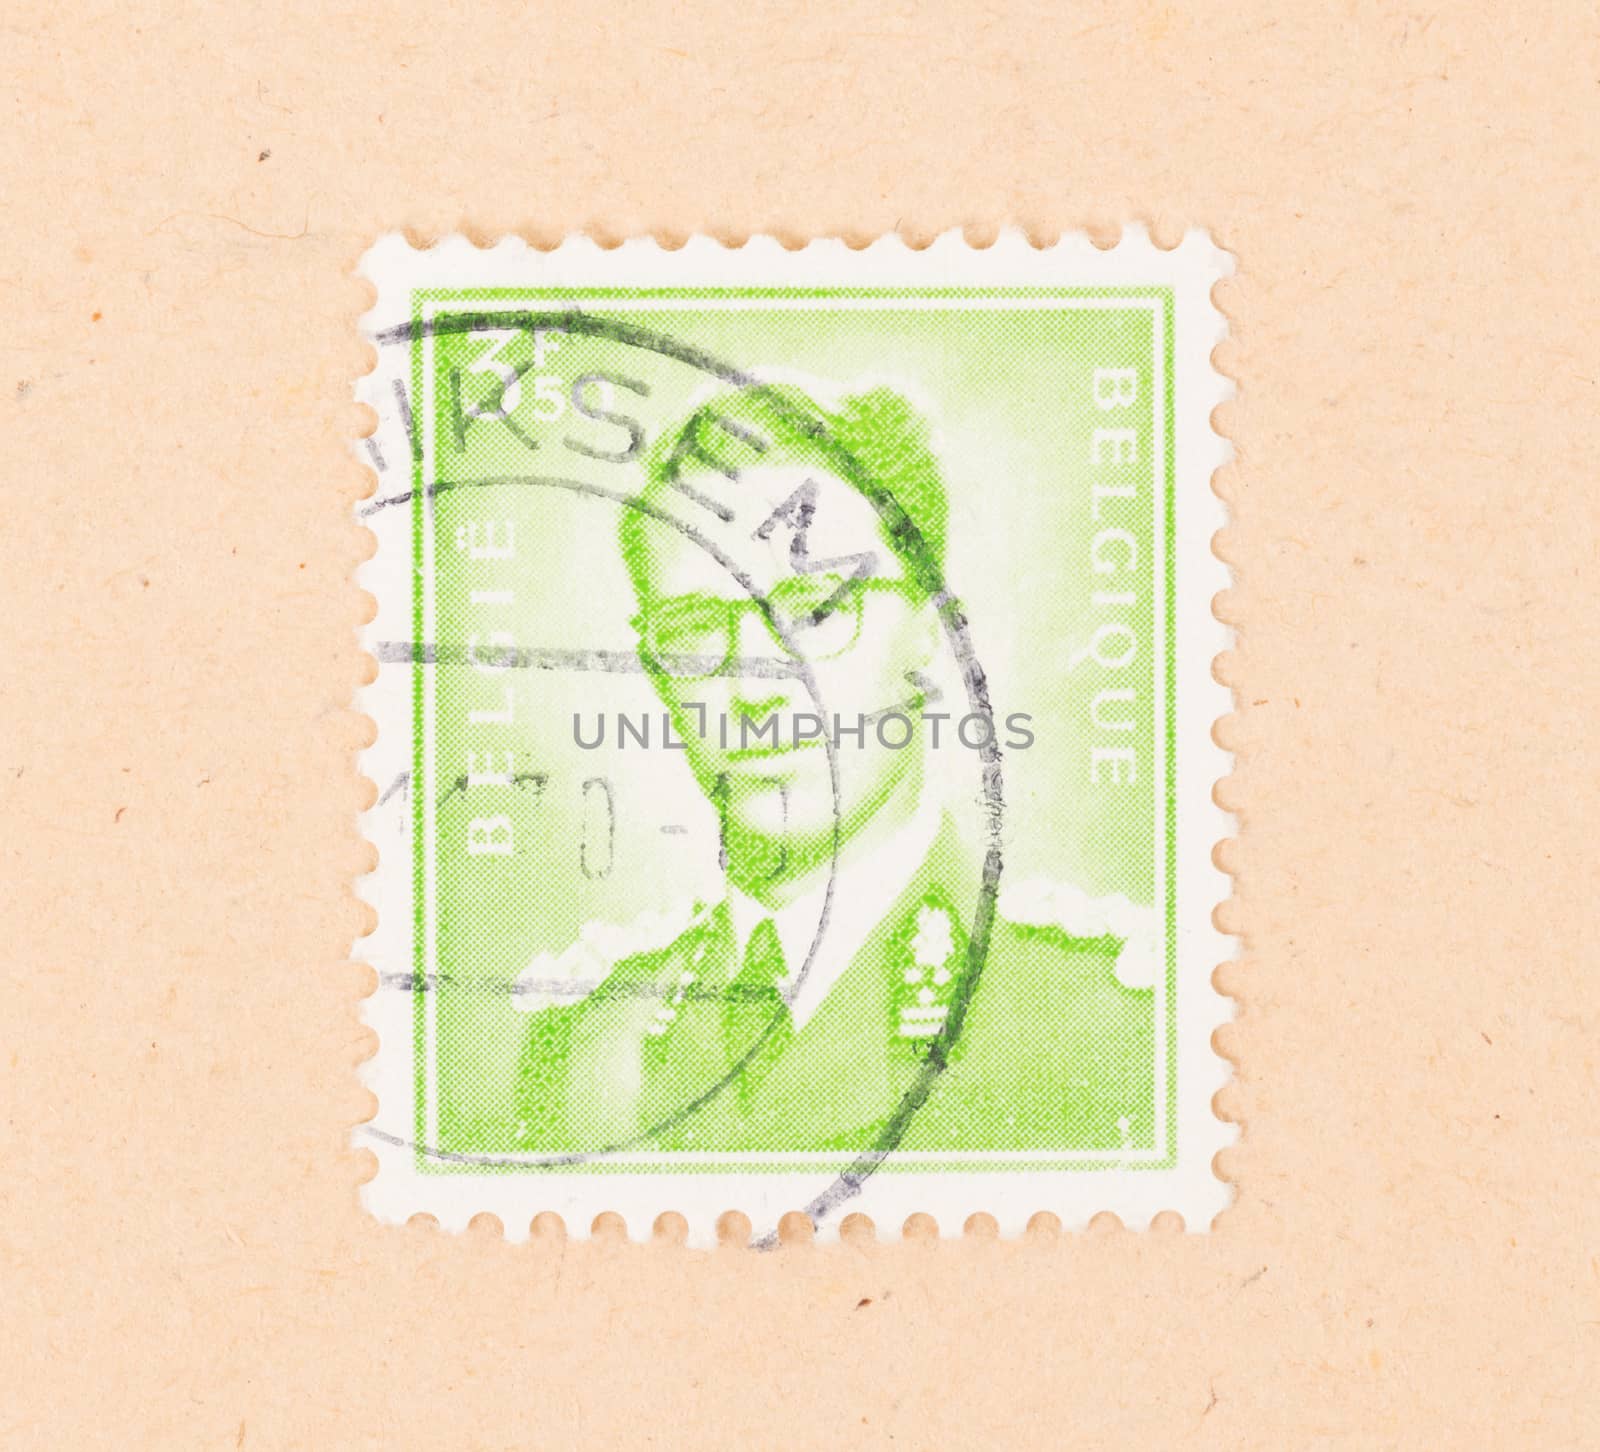 BELGIUM - CIRCA 1980: A stamp printed in Belgium shows their kin by michaklootwijk